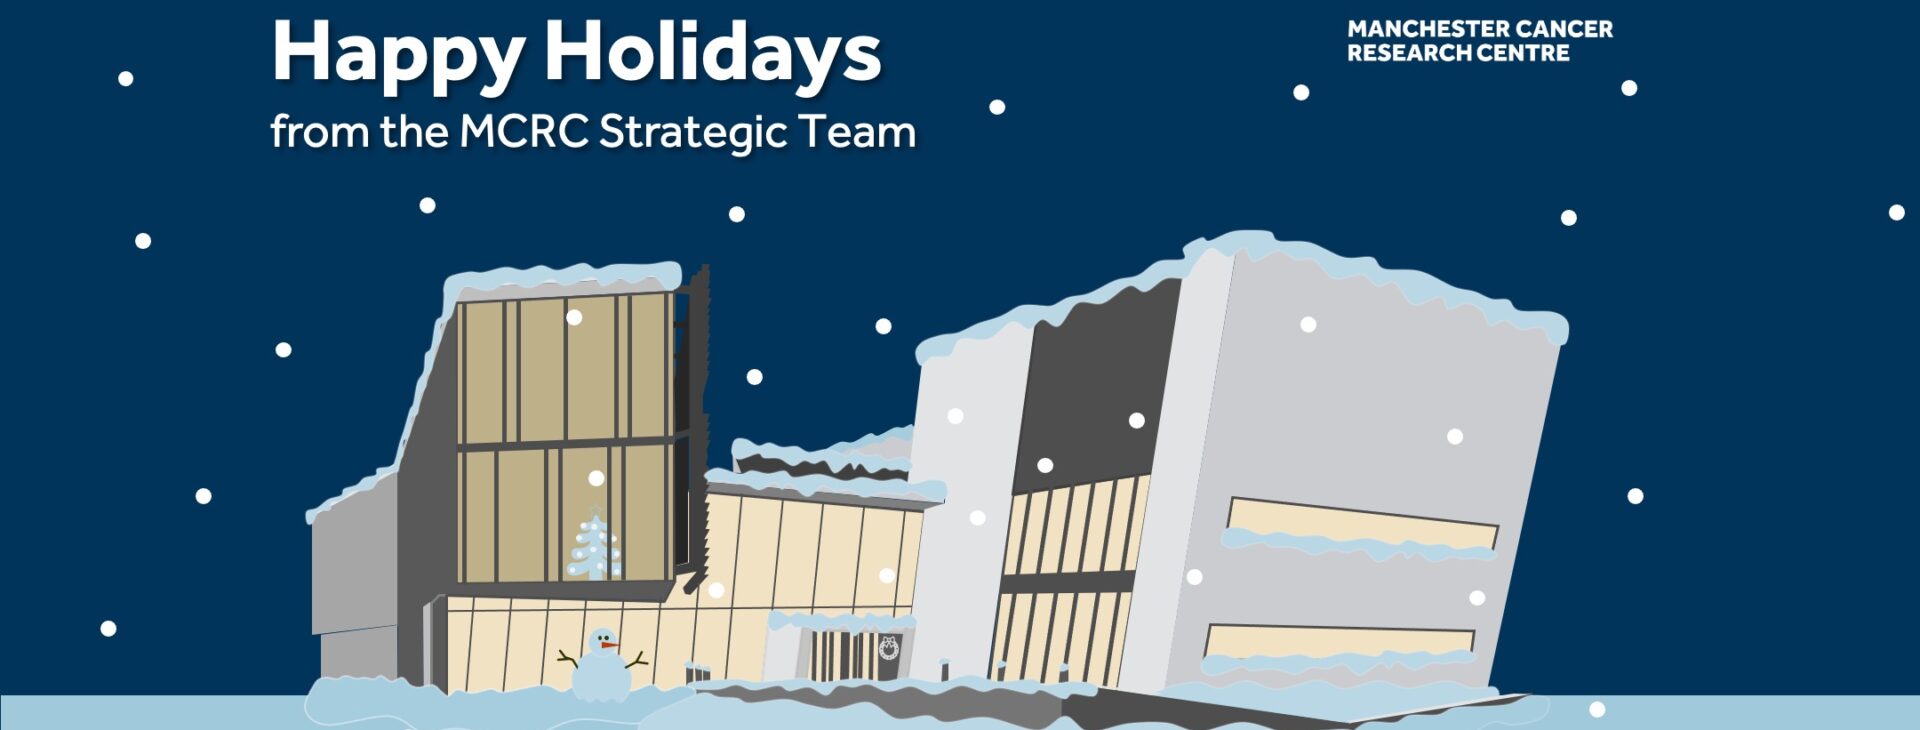 Happy Holidays in 2021 from the MCRC Team